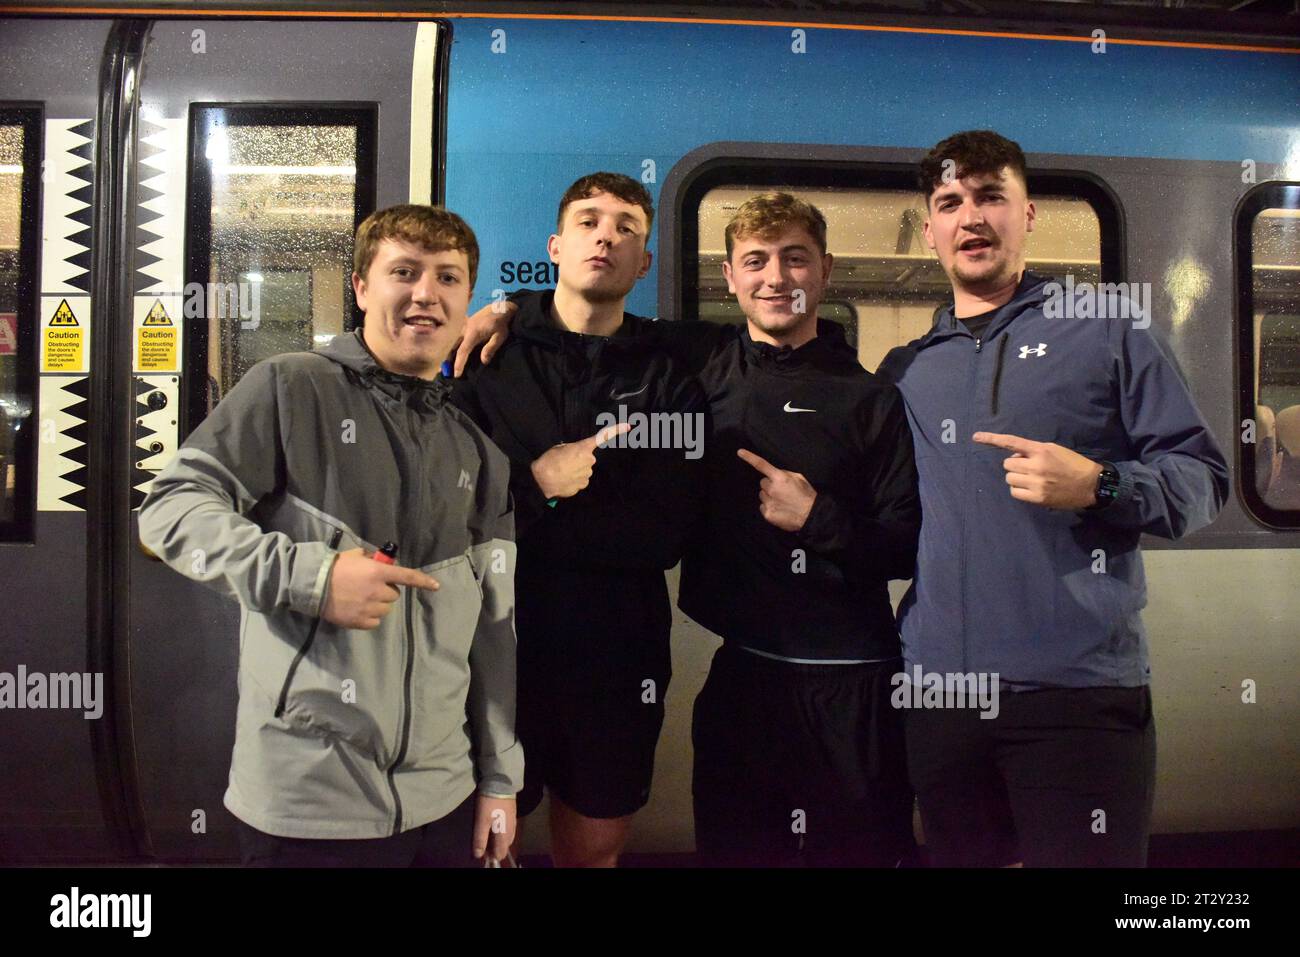 Four handsome young men wearing trendy sportswear pose at Liverpool Lime Street Railway Station where they are about to catch a train to Manchester, UK, at the height of Storm Babet, to go clubbing at the Warehouse Party at Mayfield. The finger hand gesture, I am told, translates as 'lemon' meaning cool, and is used increasingly by young people of this age group in the UK to show they oppose violence, discrimination, and extreme behavior and just want an enjoyable night out with like-minded people. Stock Photo